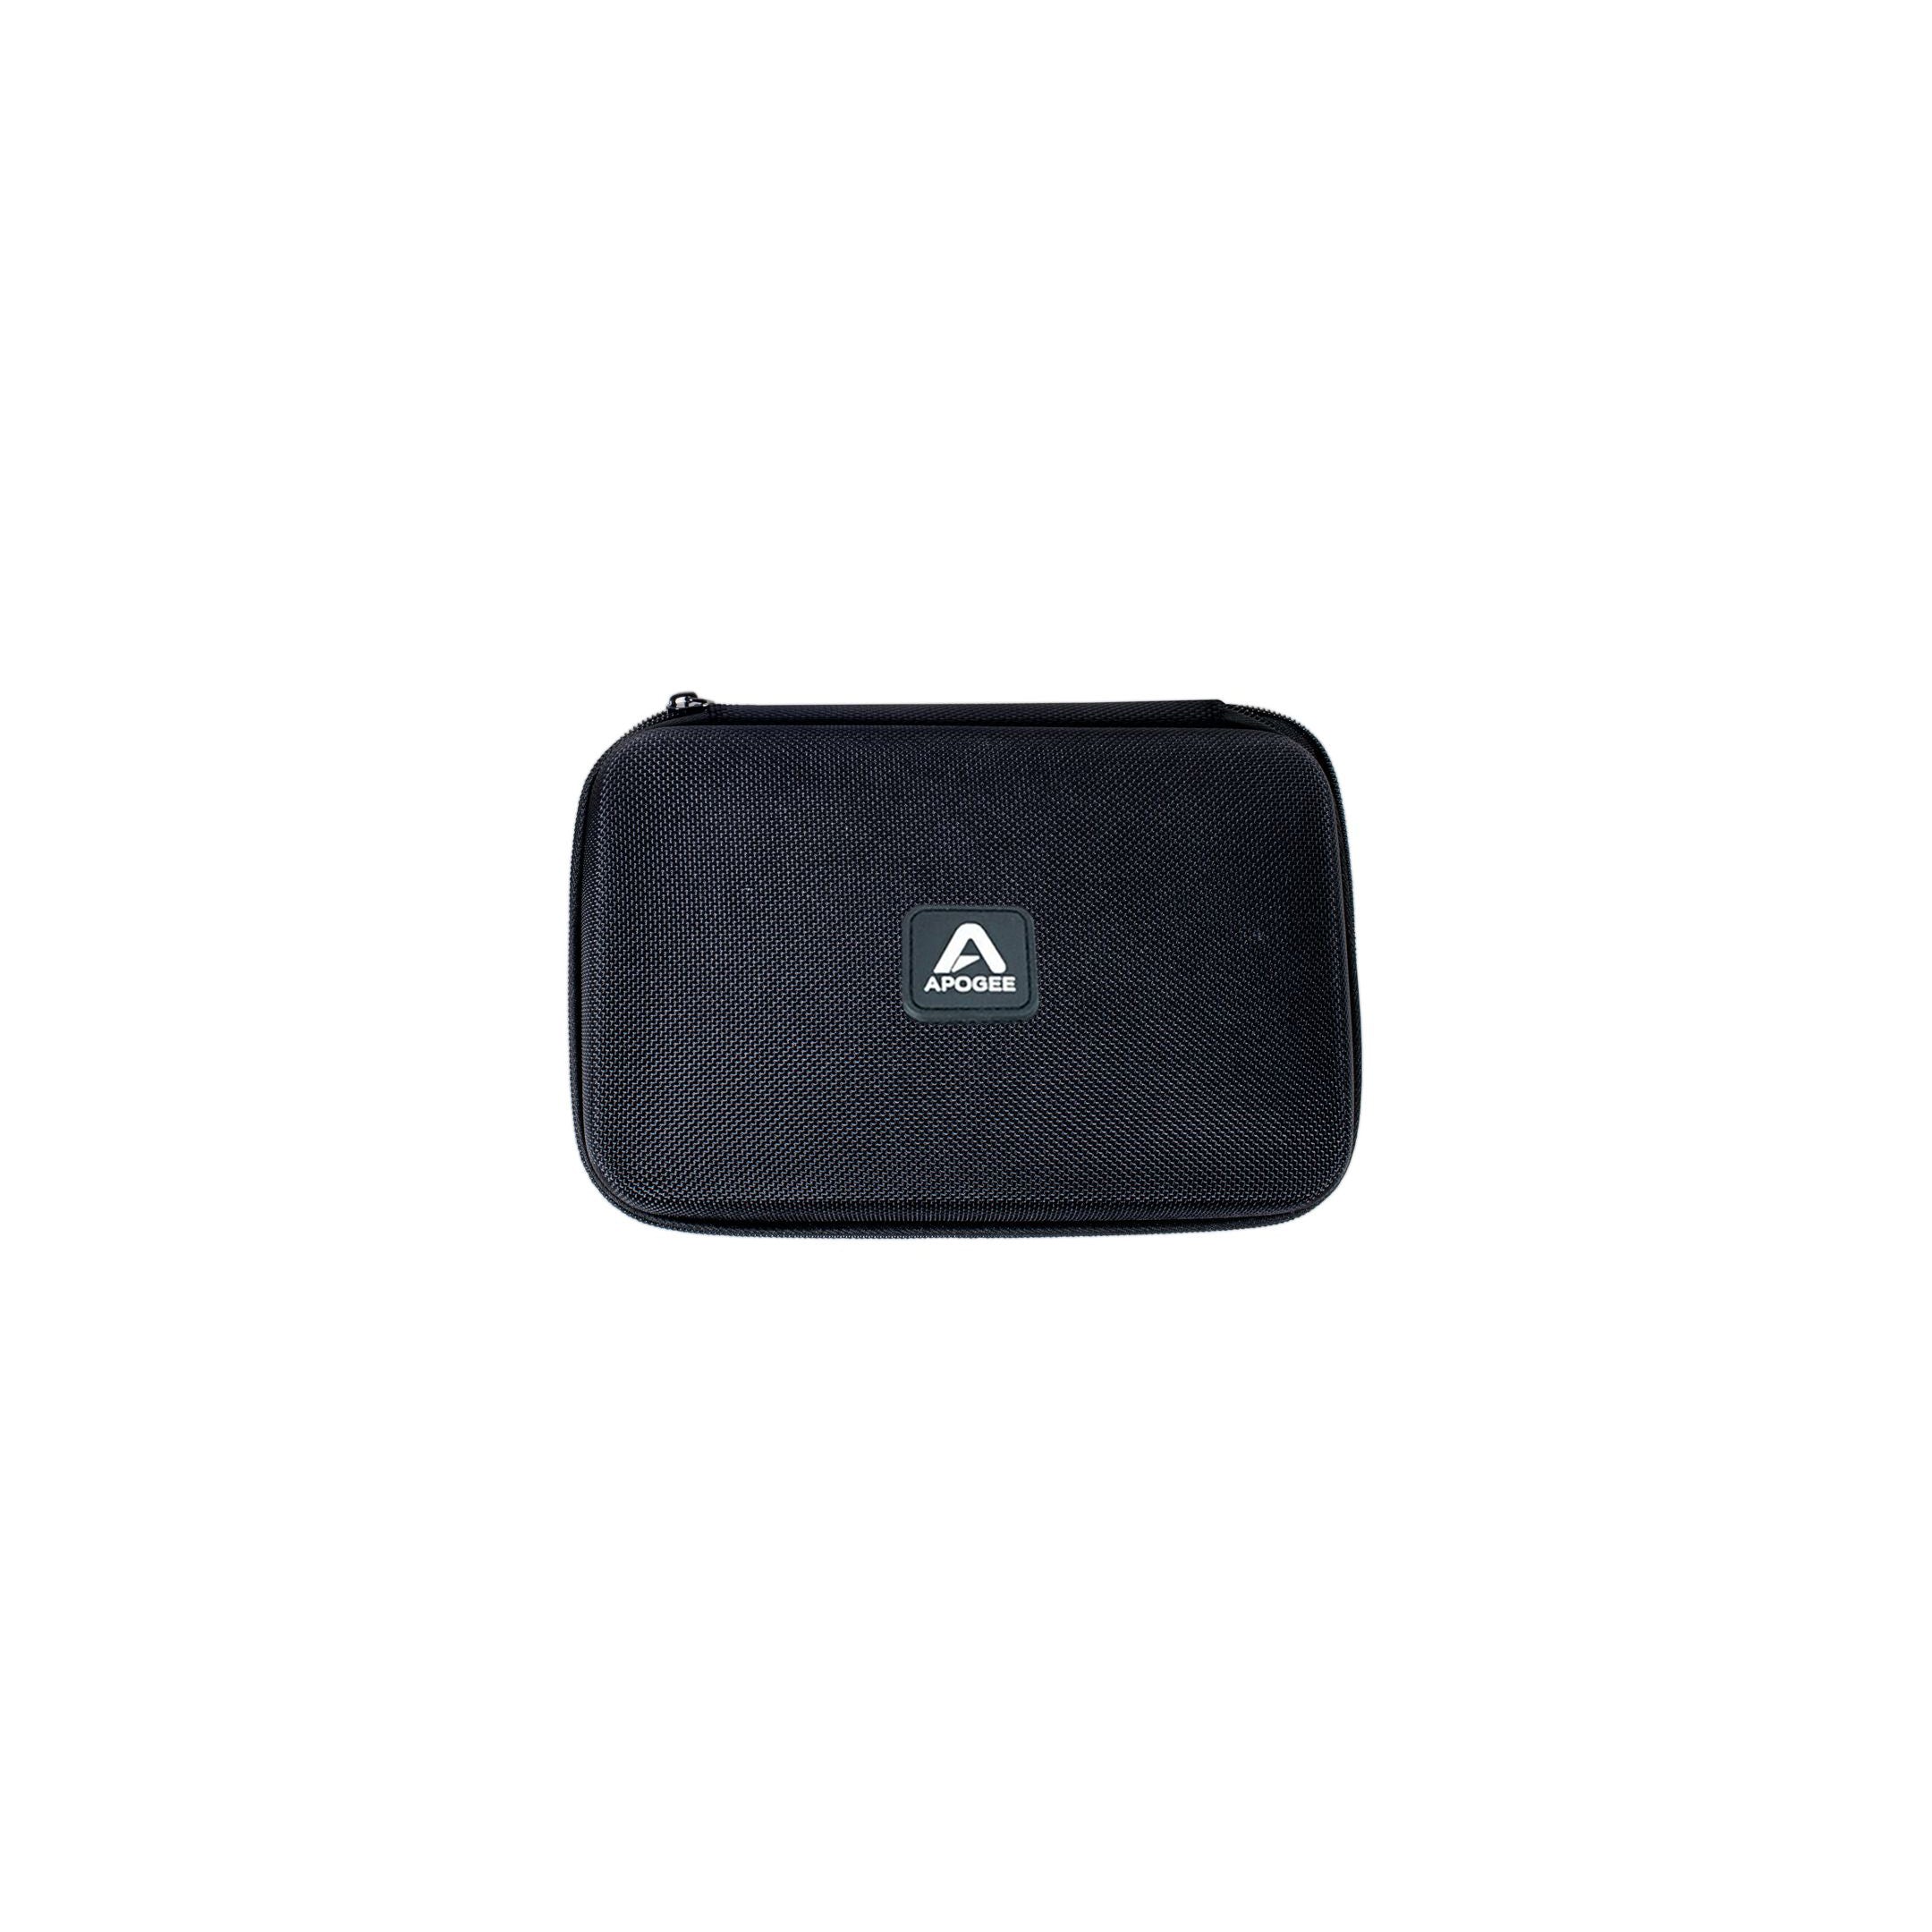 Apogee HypeMiC Carrying Case